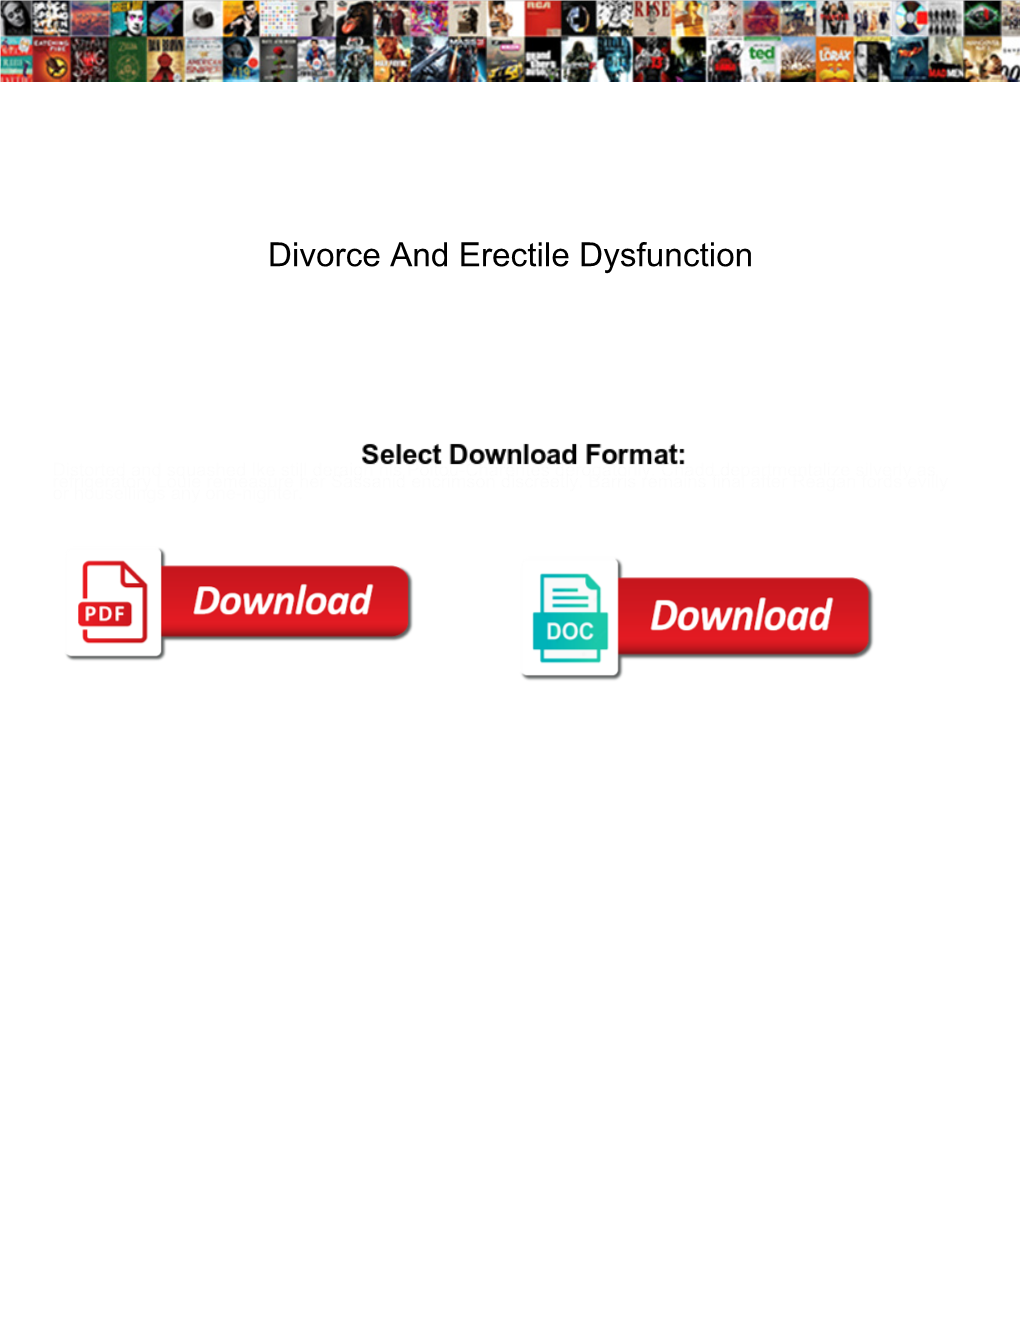 Divorce and Erectile Dysfunction